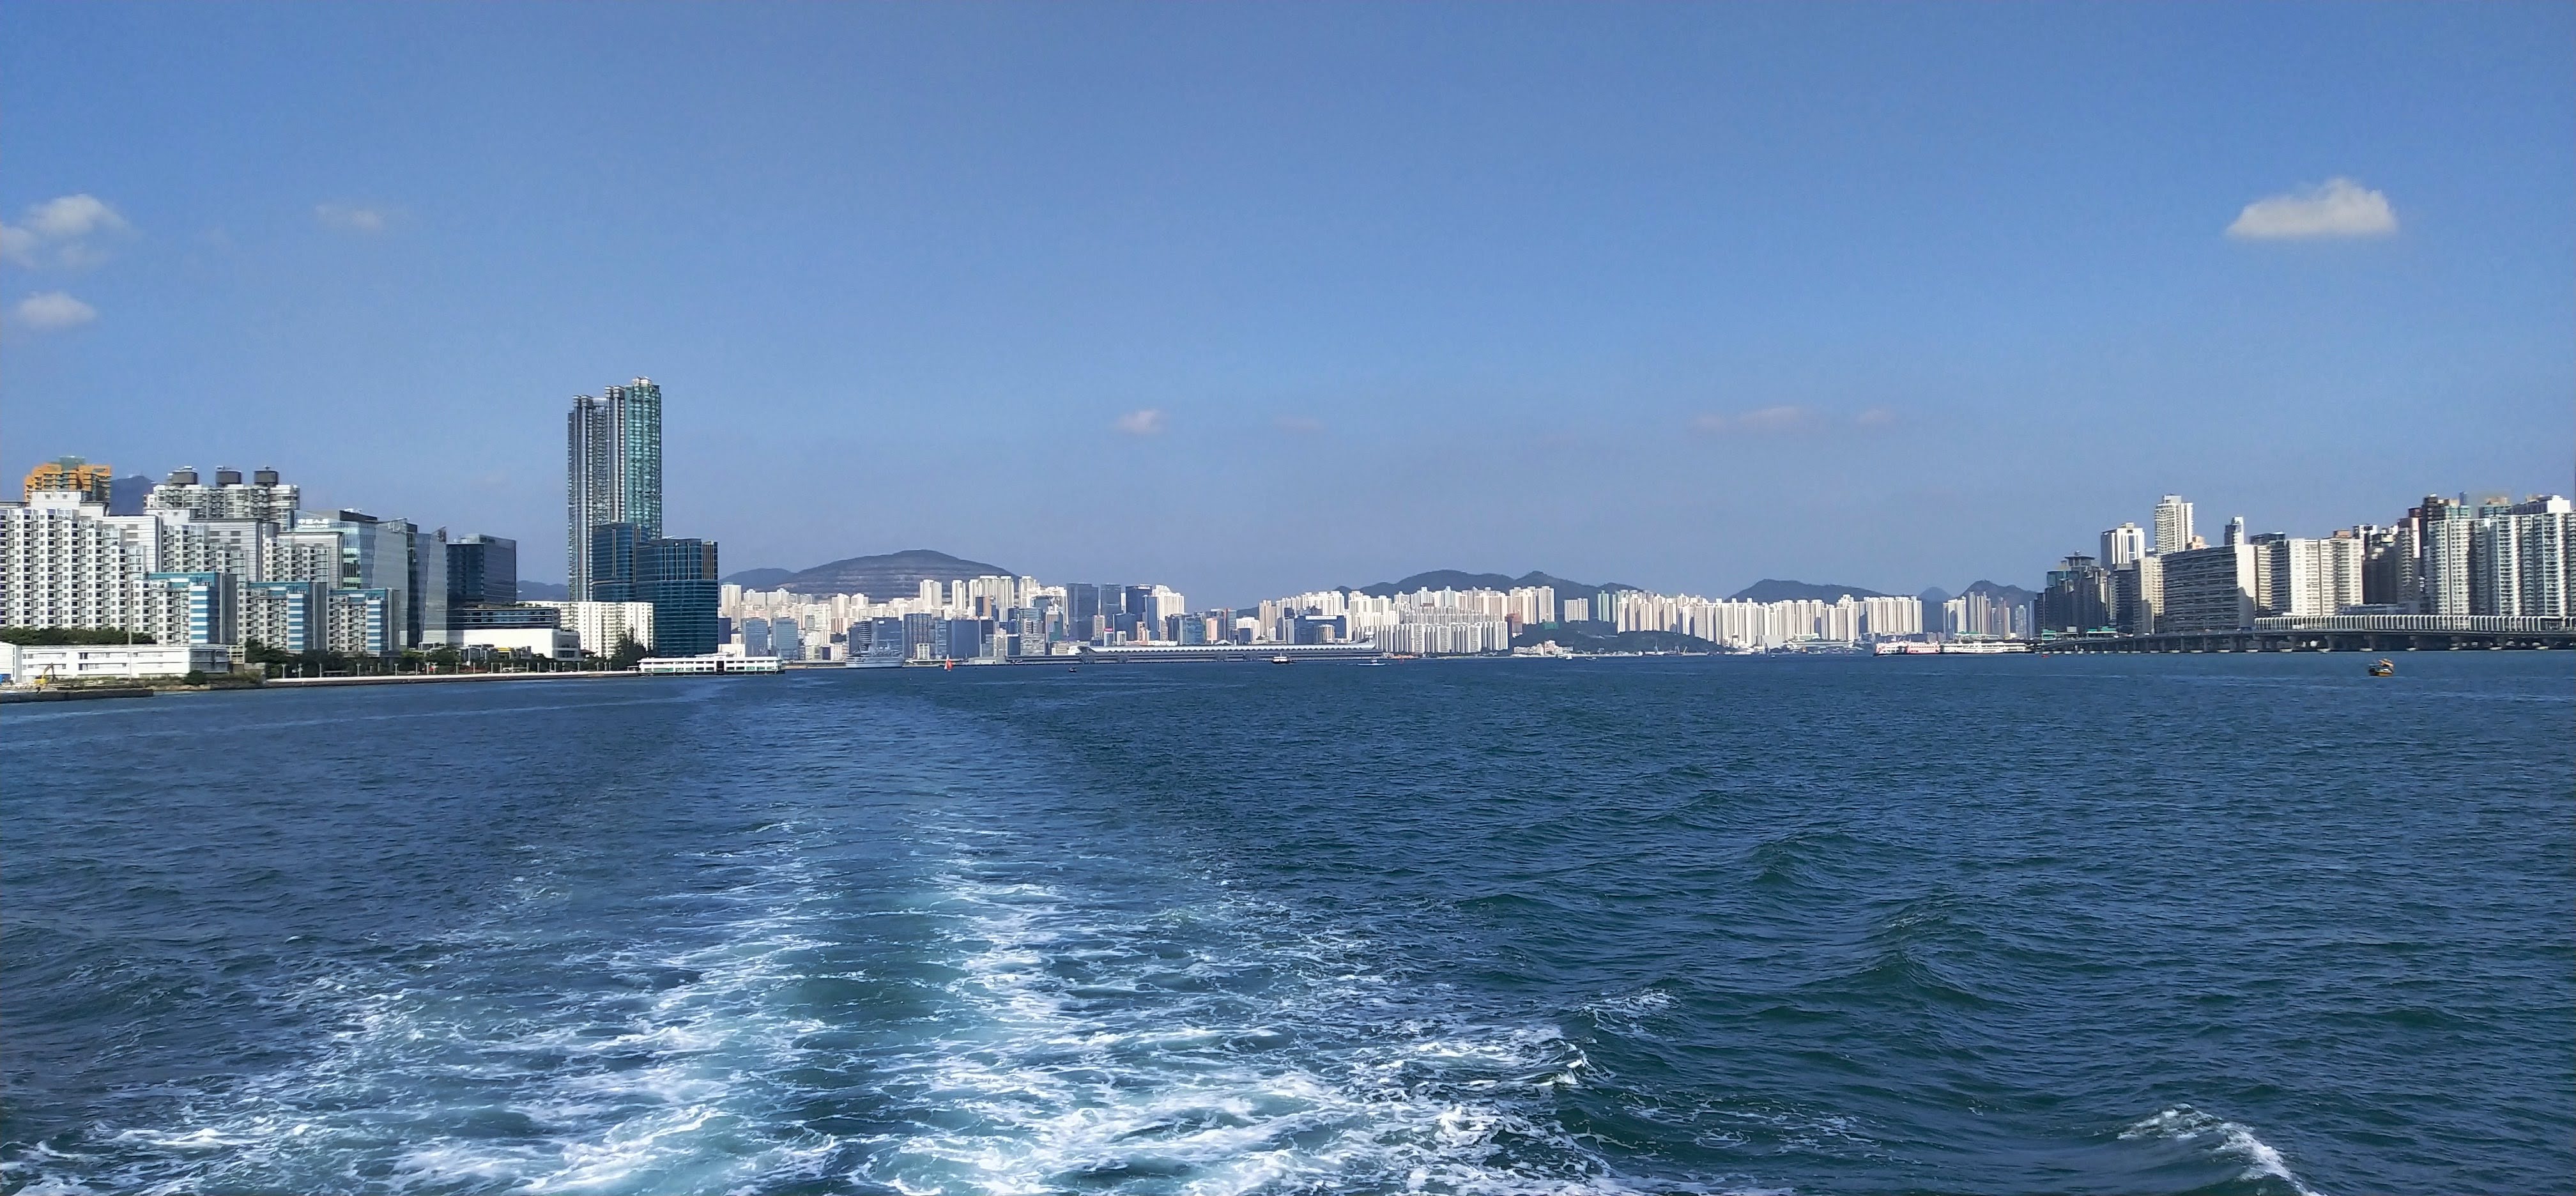 Nice Victoria Harbor view from the Hung Hom Central ferry